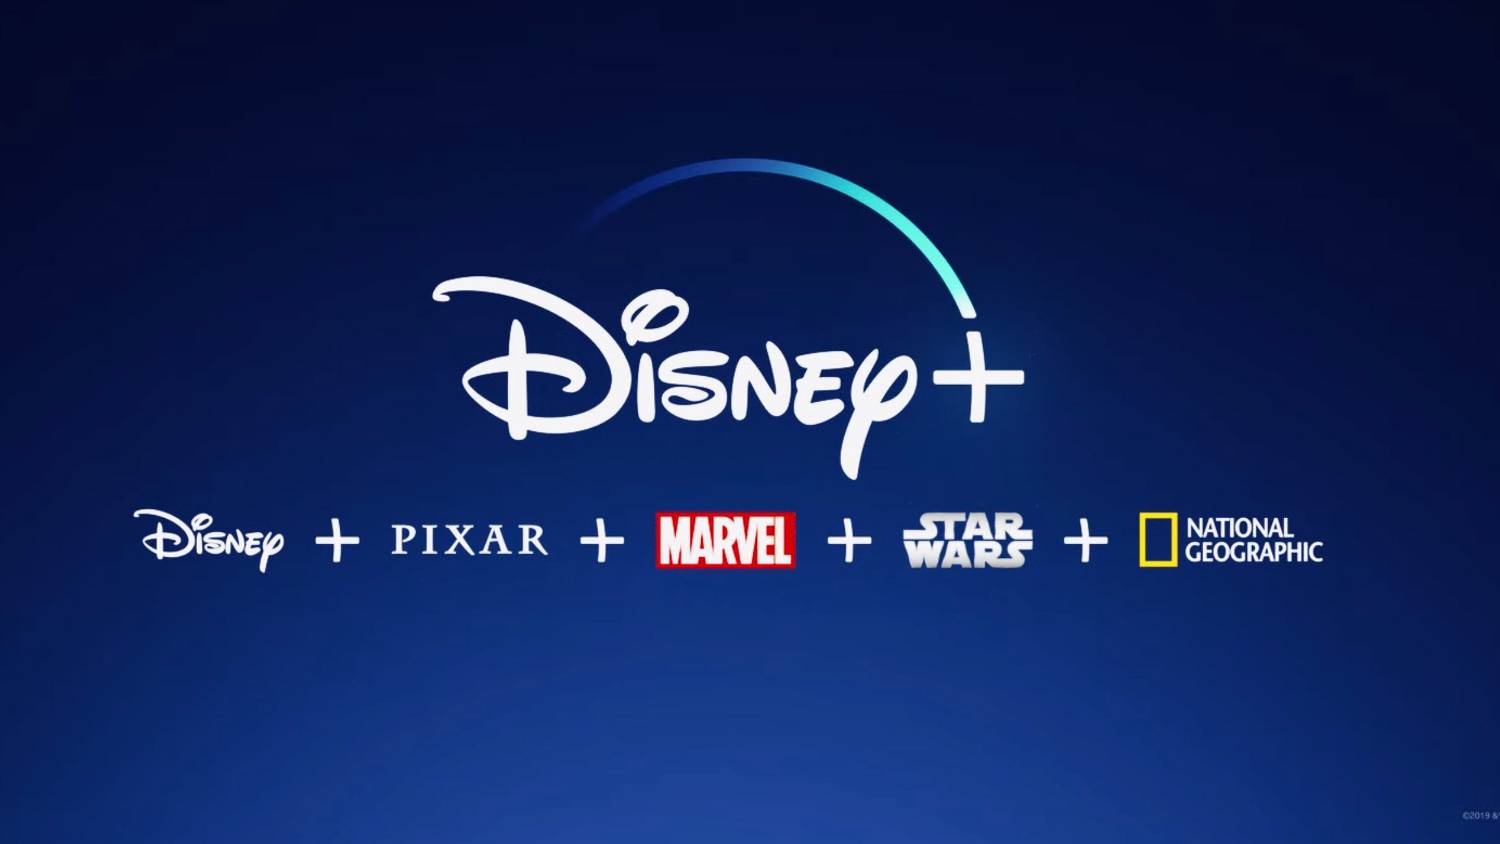 Disney+ will launch ad-supported subscriptions in late 2022